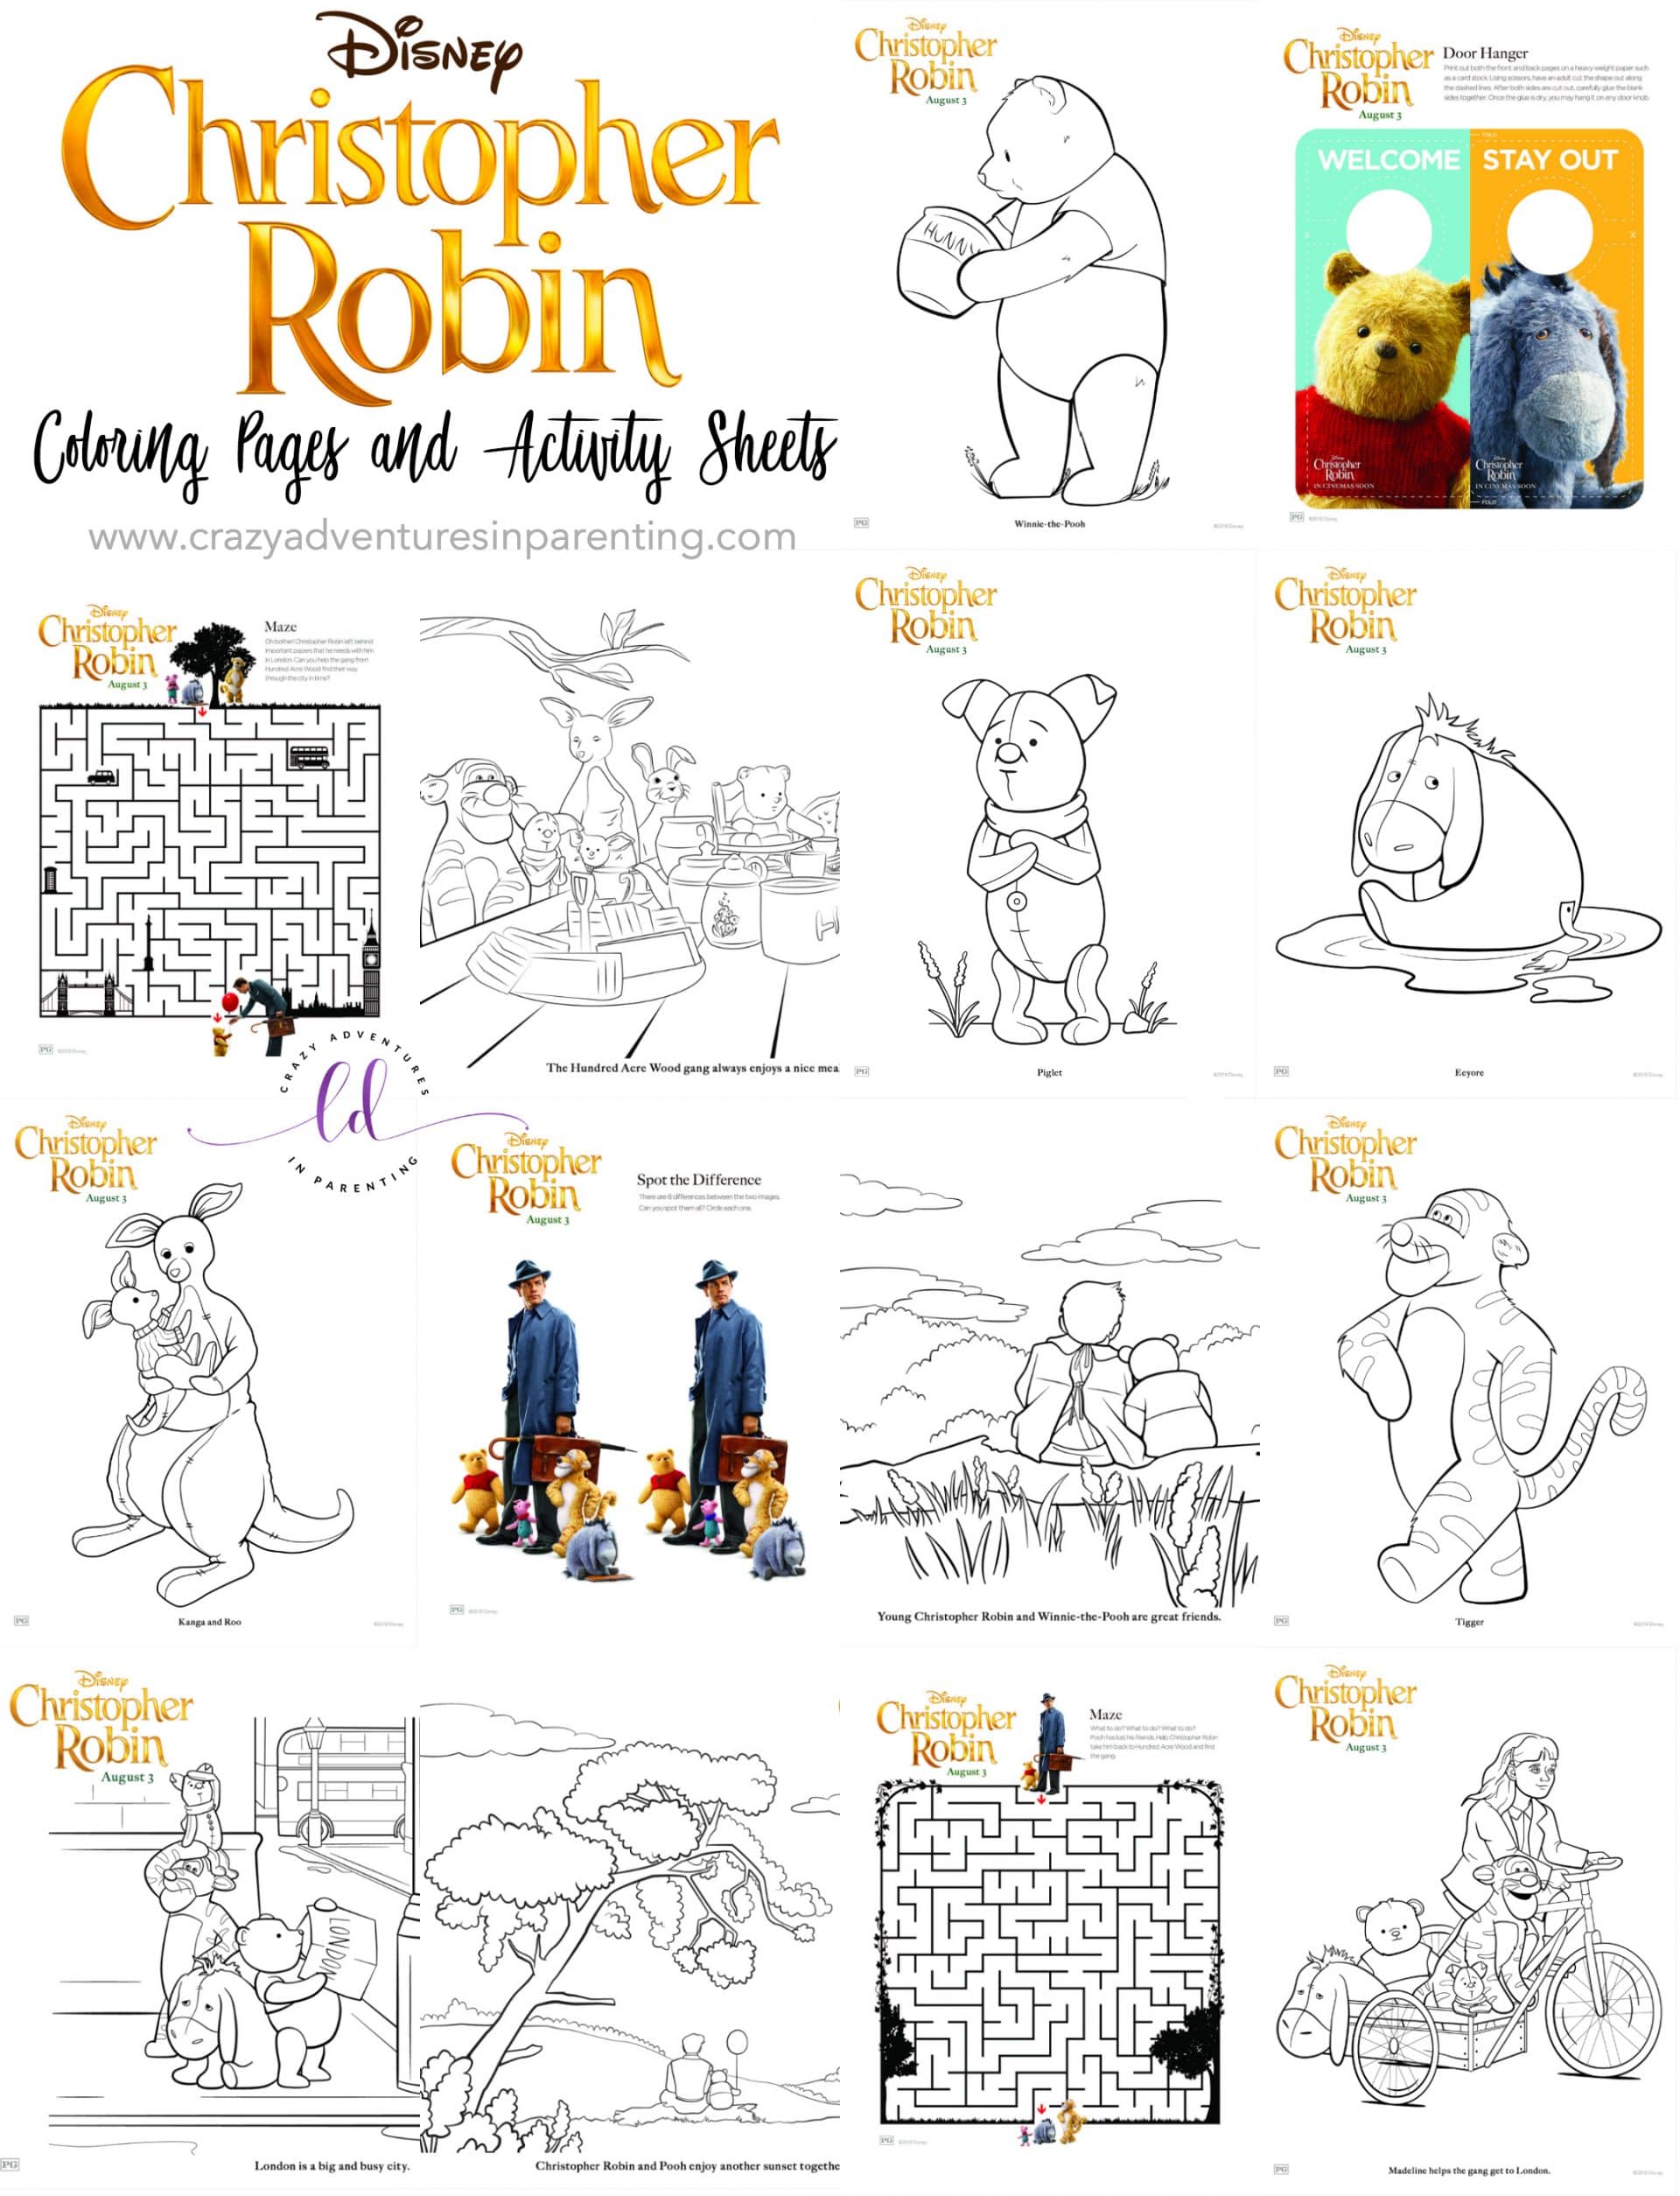 Christopher Robin Coloring Pages and Activity Sheets